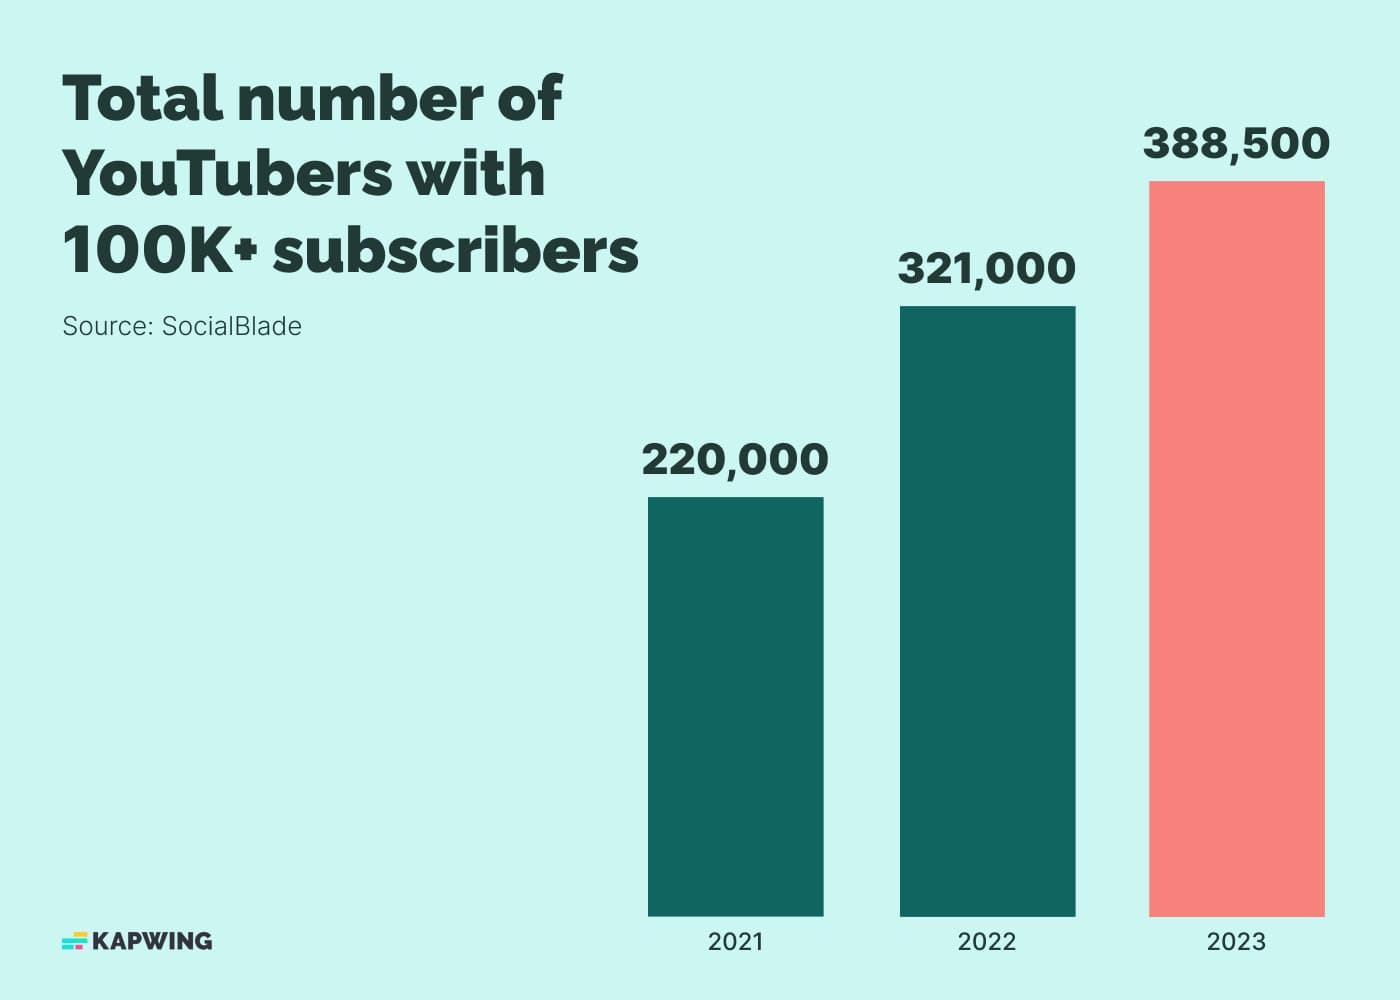 Bar graph showing how many YouTubers have more than 100,000 subscribers. In 2023, the number of YouTube channels with over 100,000 subscribers was 388,500. In 2022, the number was around 321,000. In 2021, the number was around 220,000. This data is from SocialBlade.